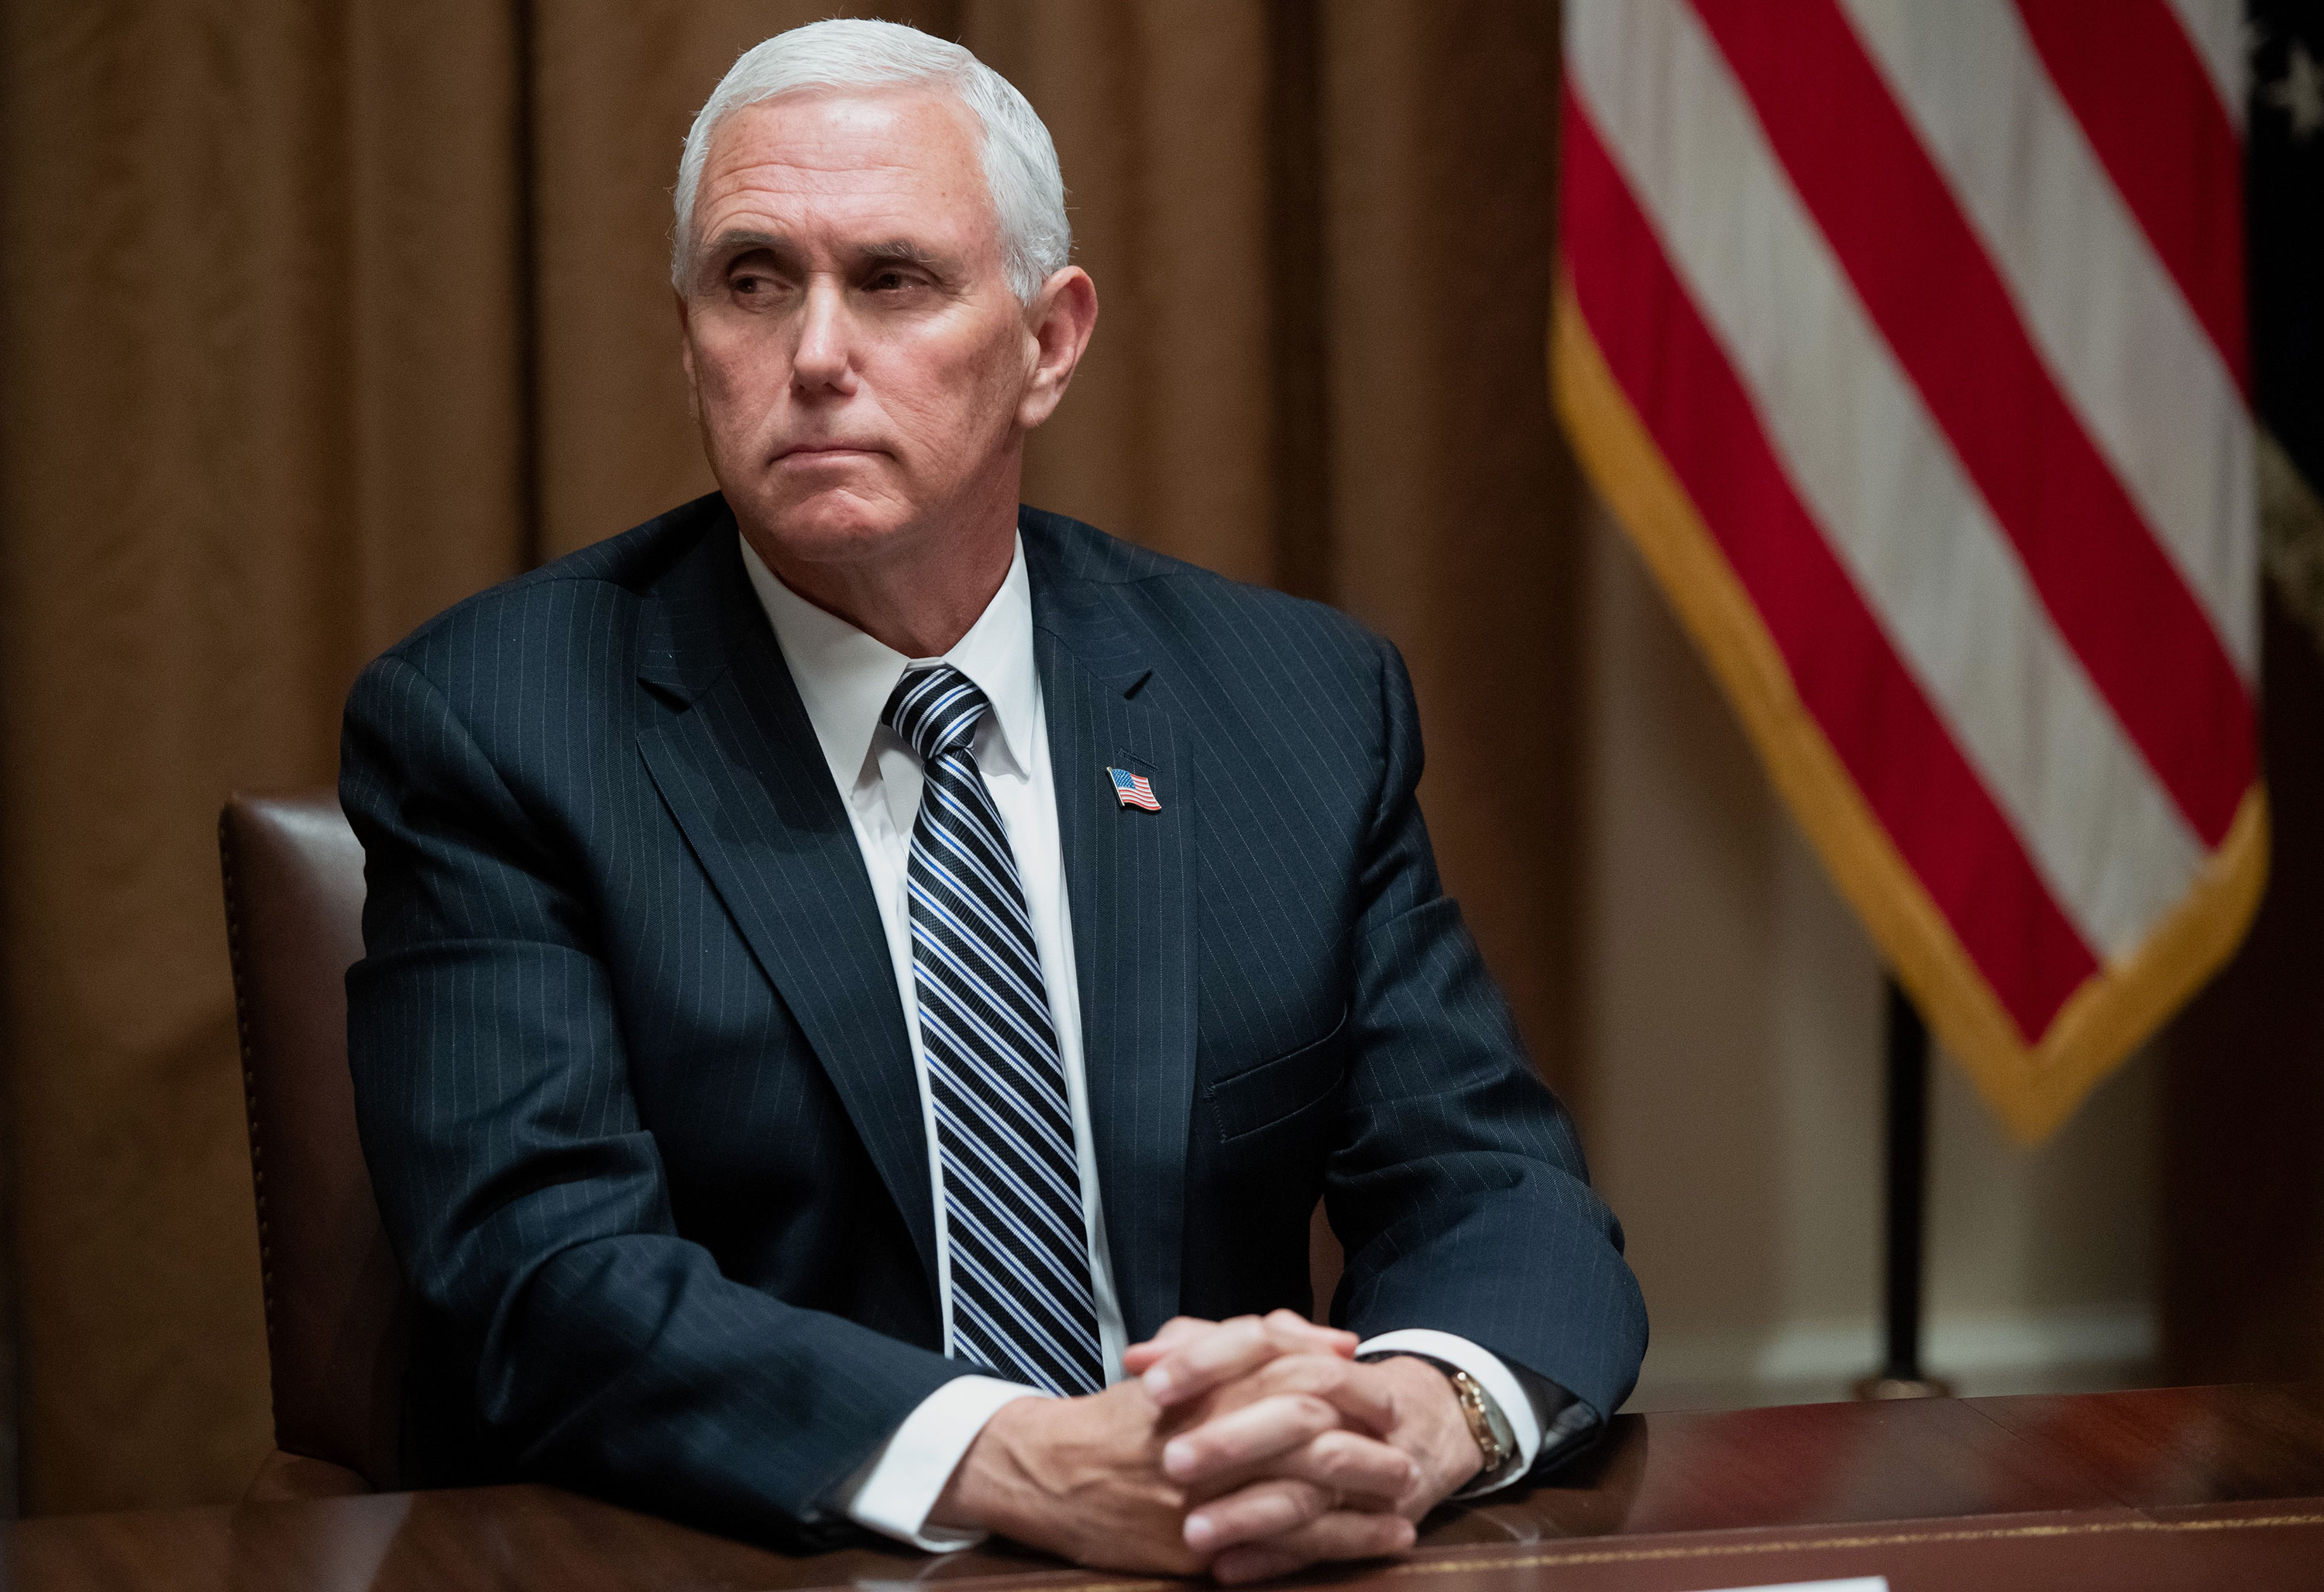 Vice President Mike Pence is attending a roundtable meeting at the White House in Washington on June 15th.